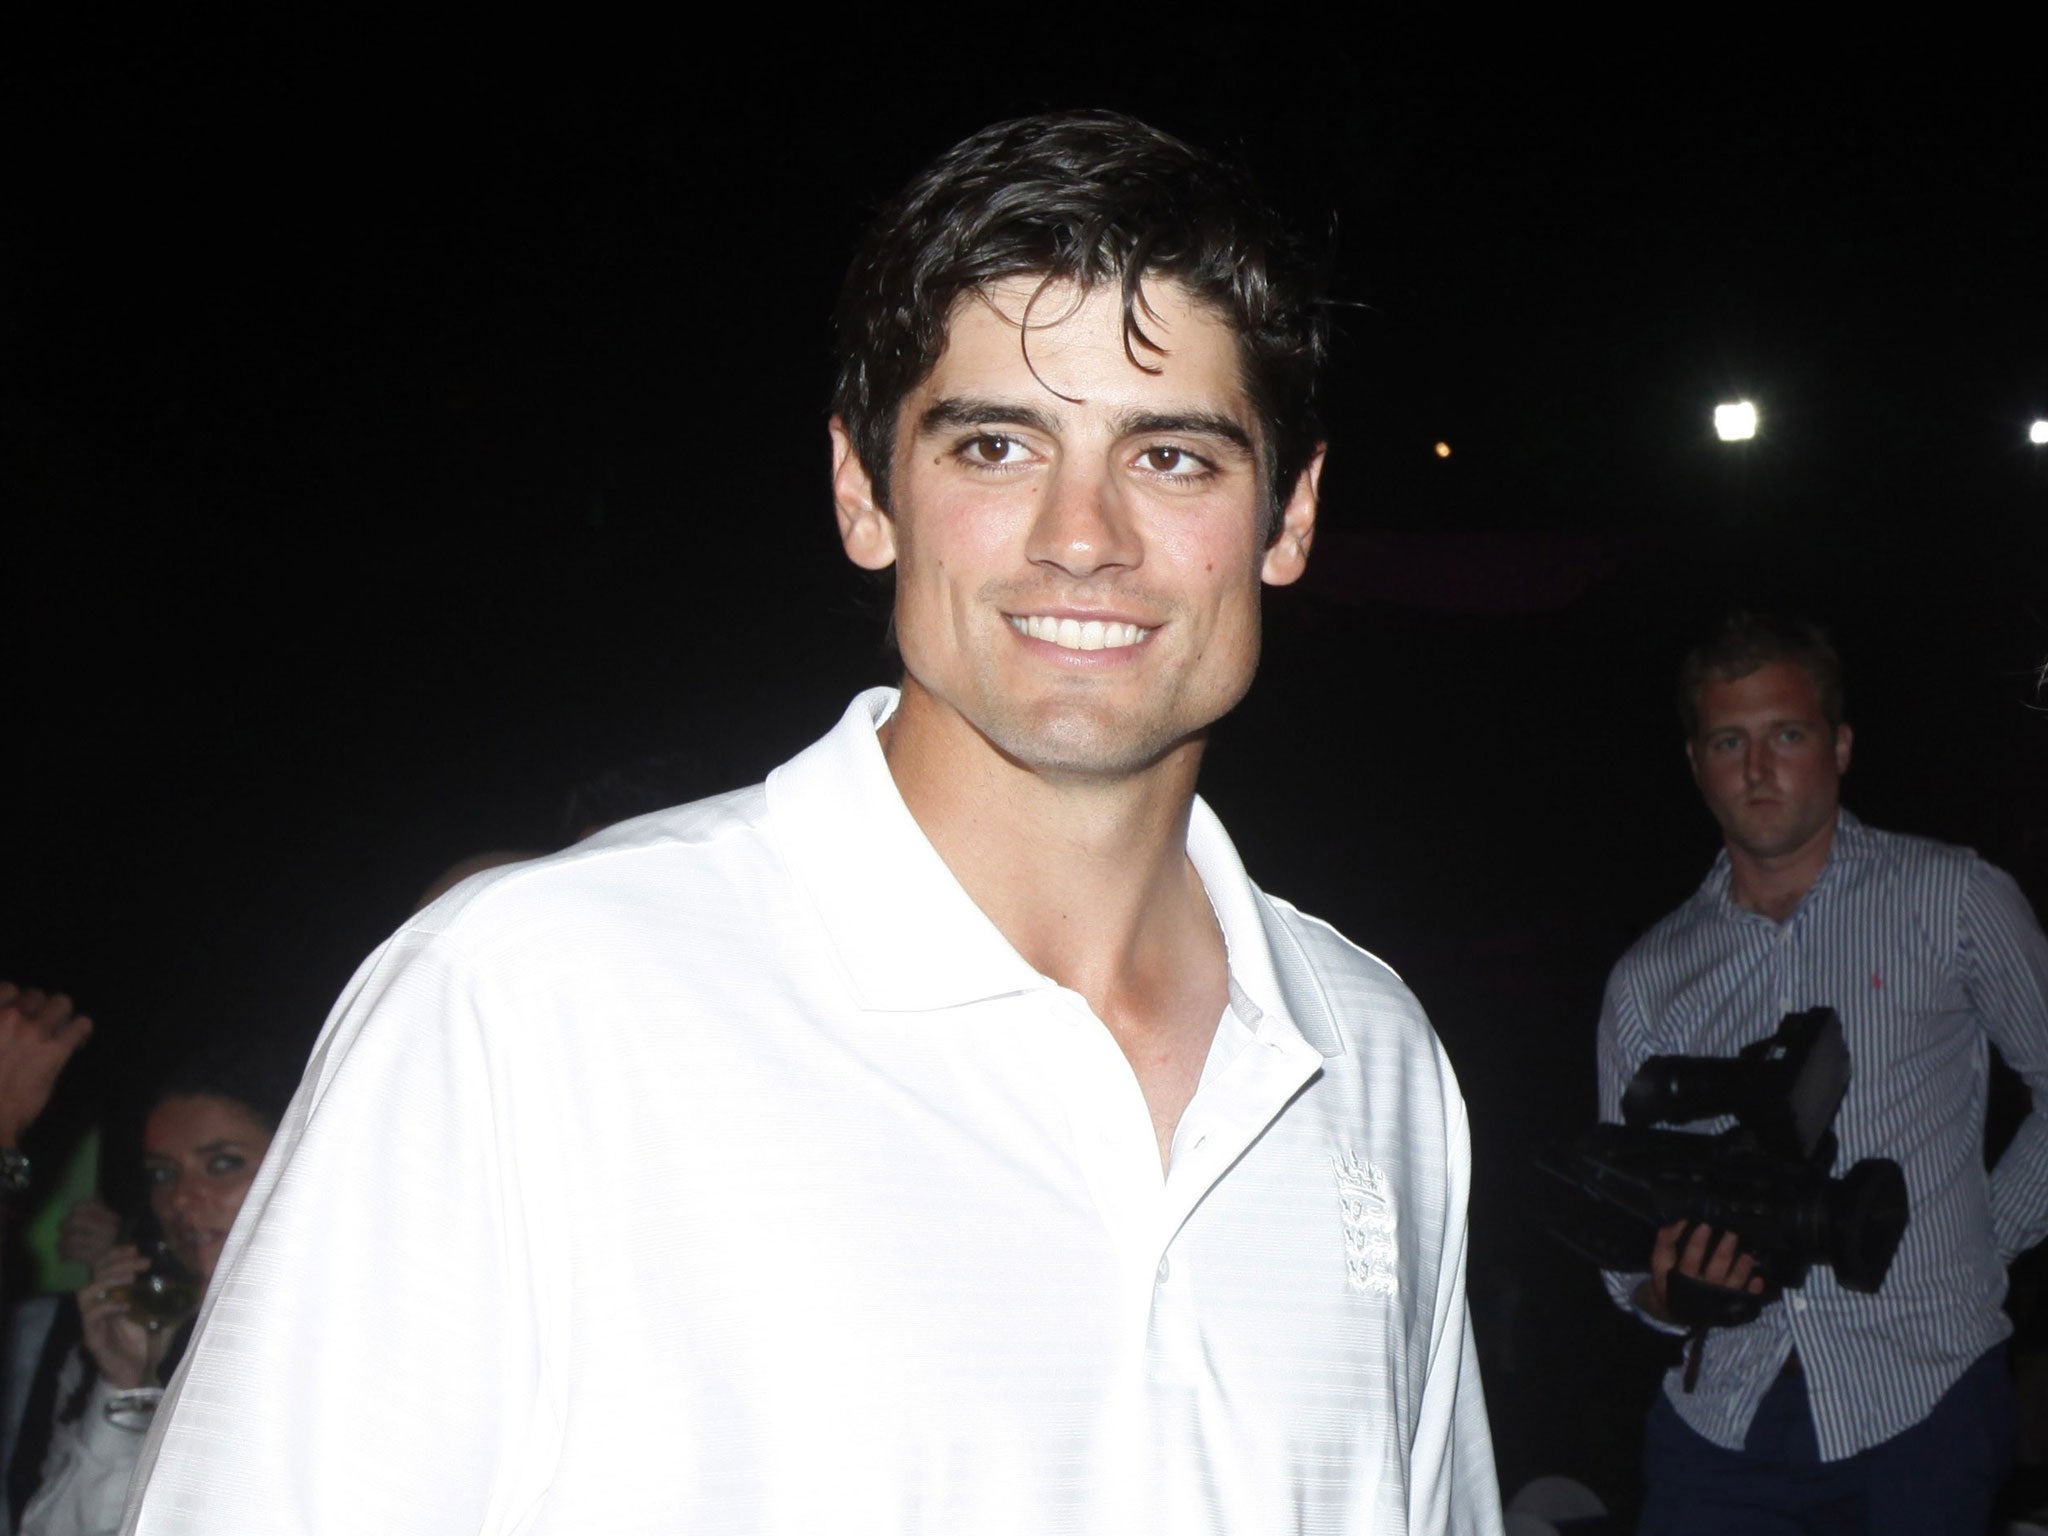 Alastair Cook: The England captain has reached 23 Test hundreds at 27 years of age